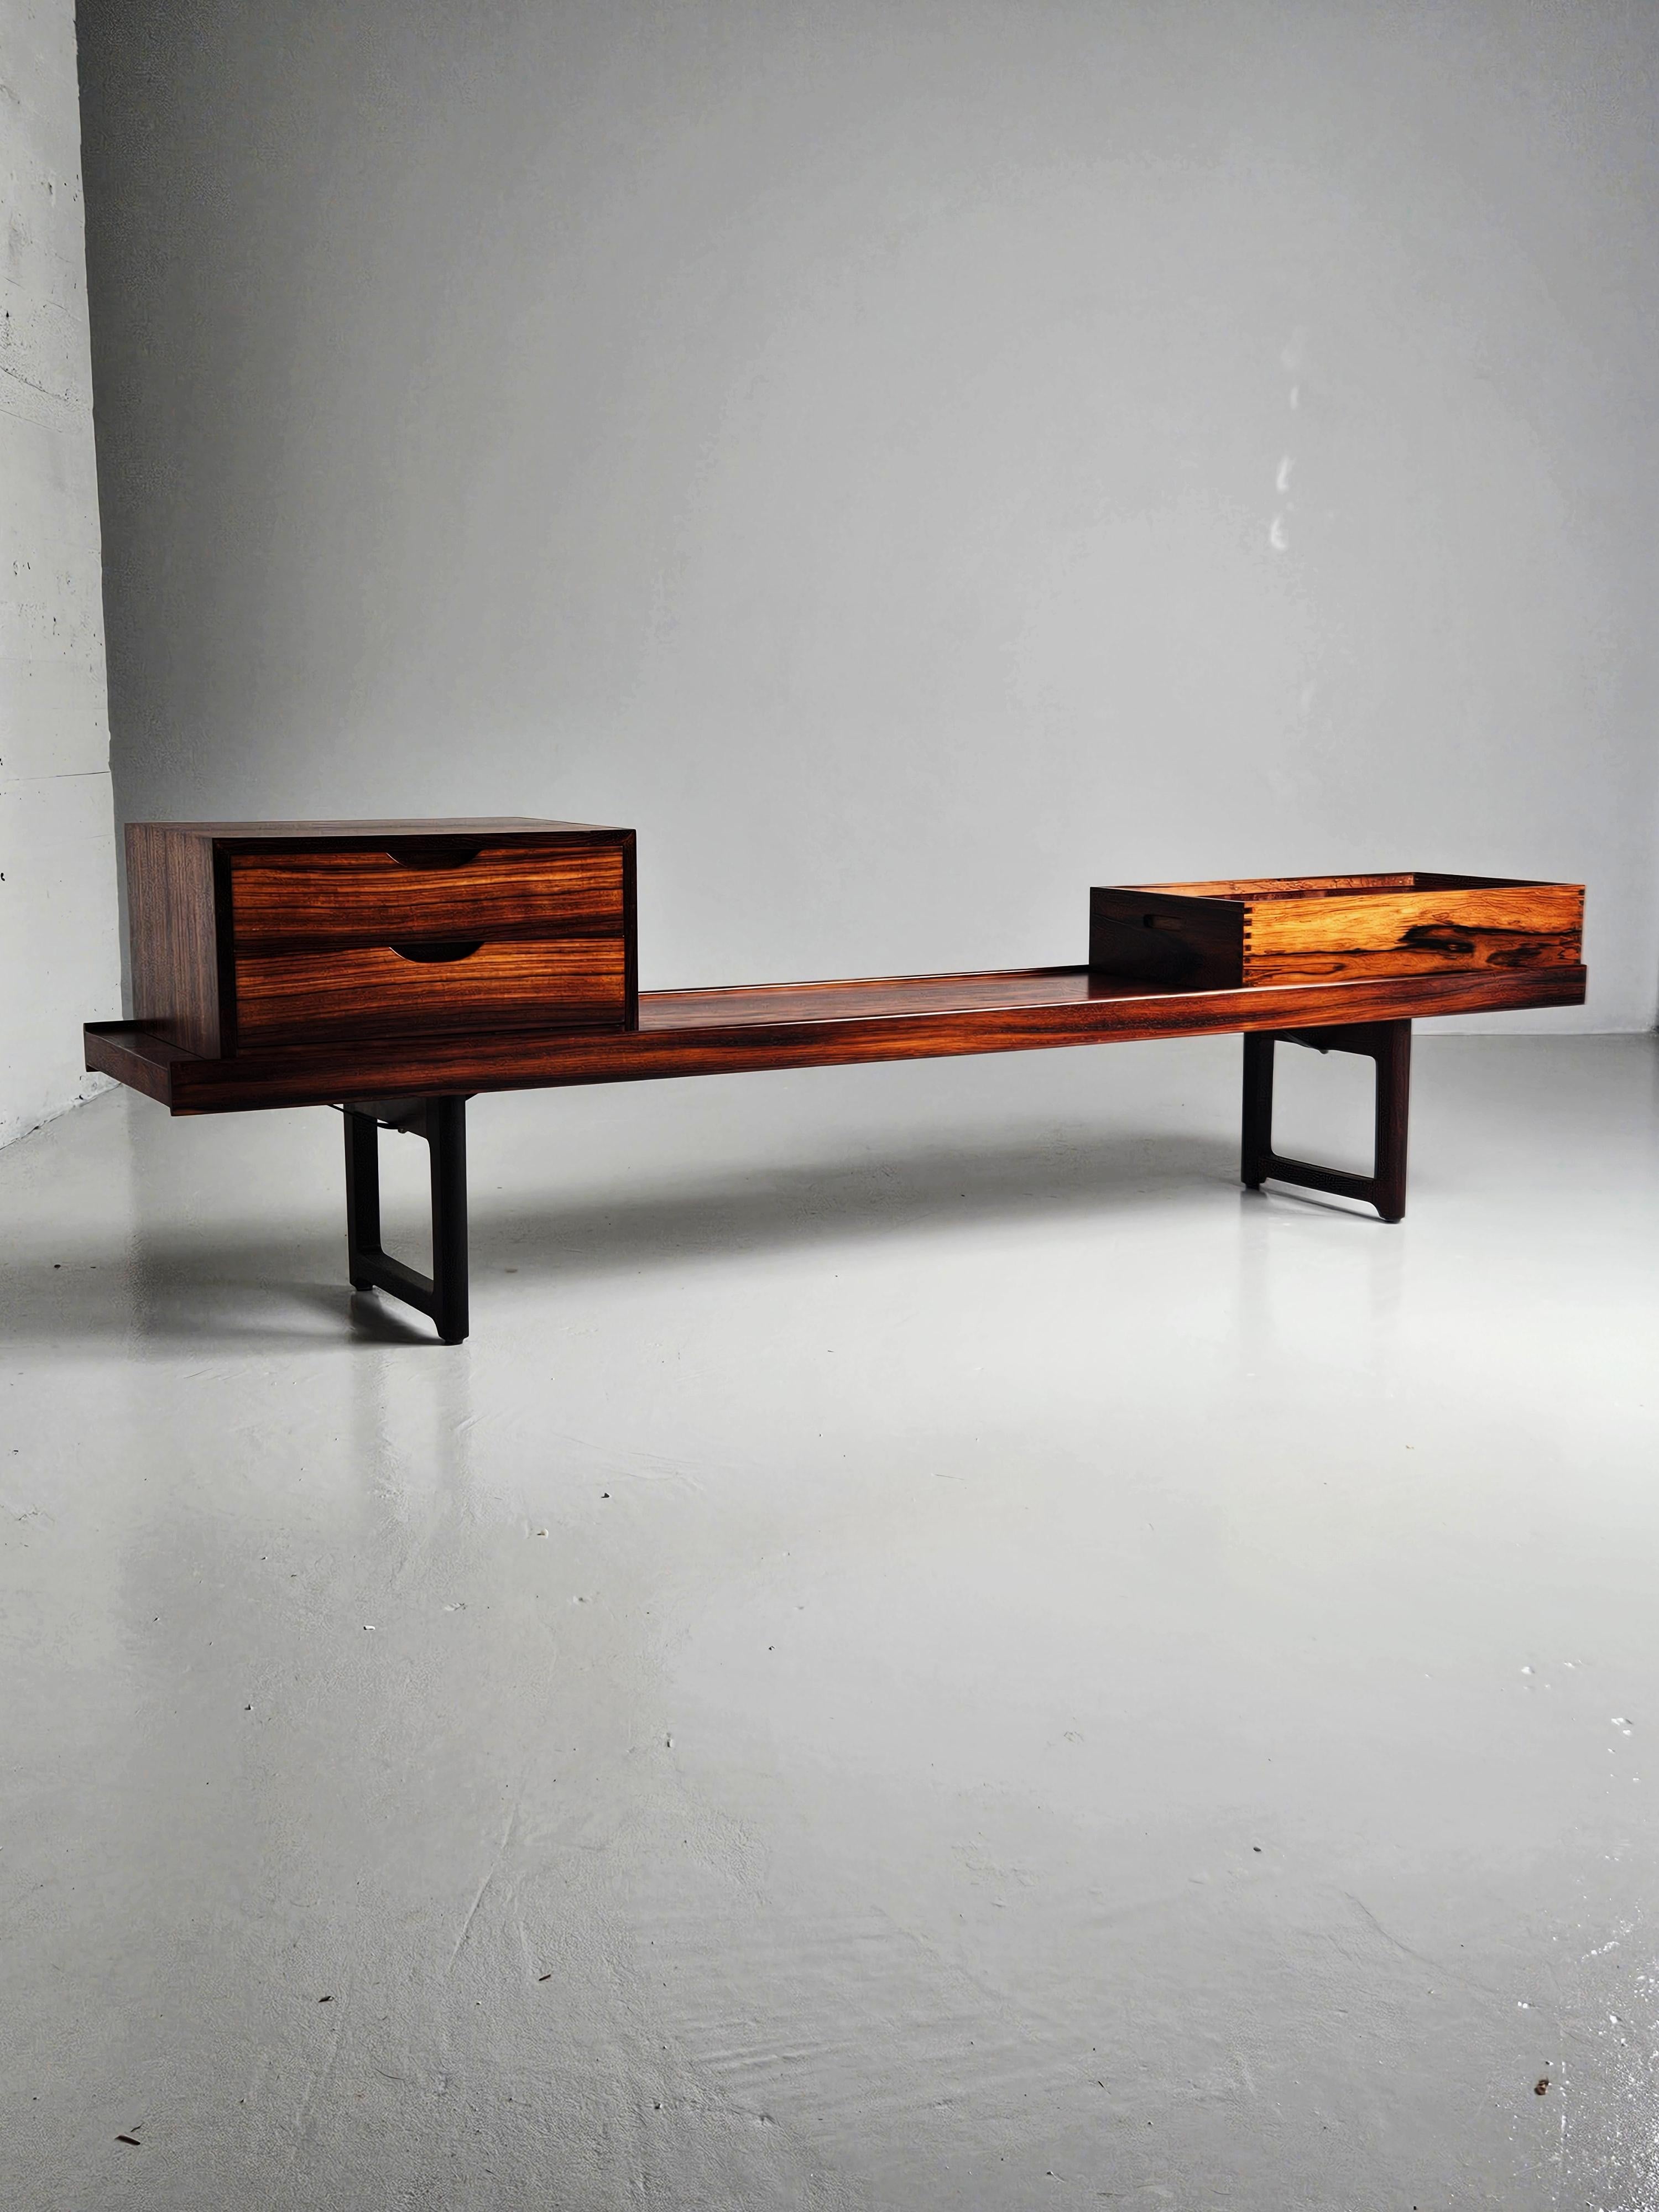 ’Krobo’ bench designed by Torbjørn Afdal. Produced in Norway in the 1960s for 
Mellemstrands Bruksbo. 

Made in rosewood. Modular and comes with an original plant box and a chest with two drawers.